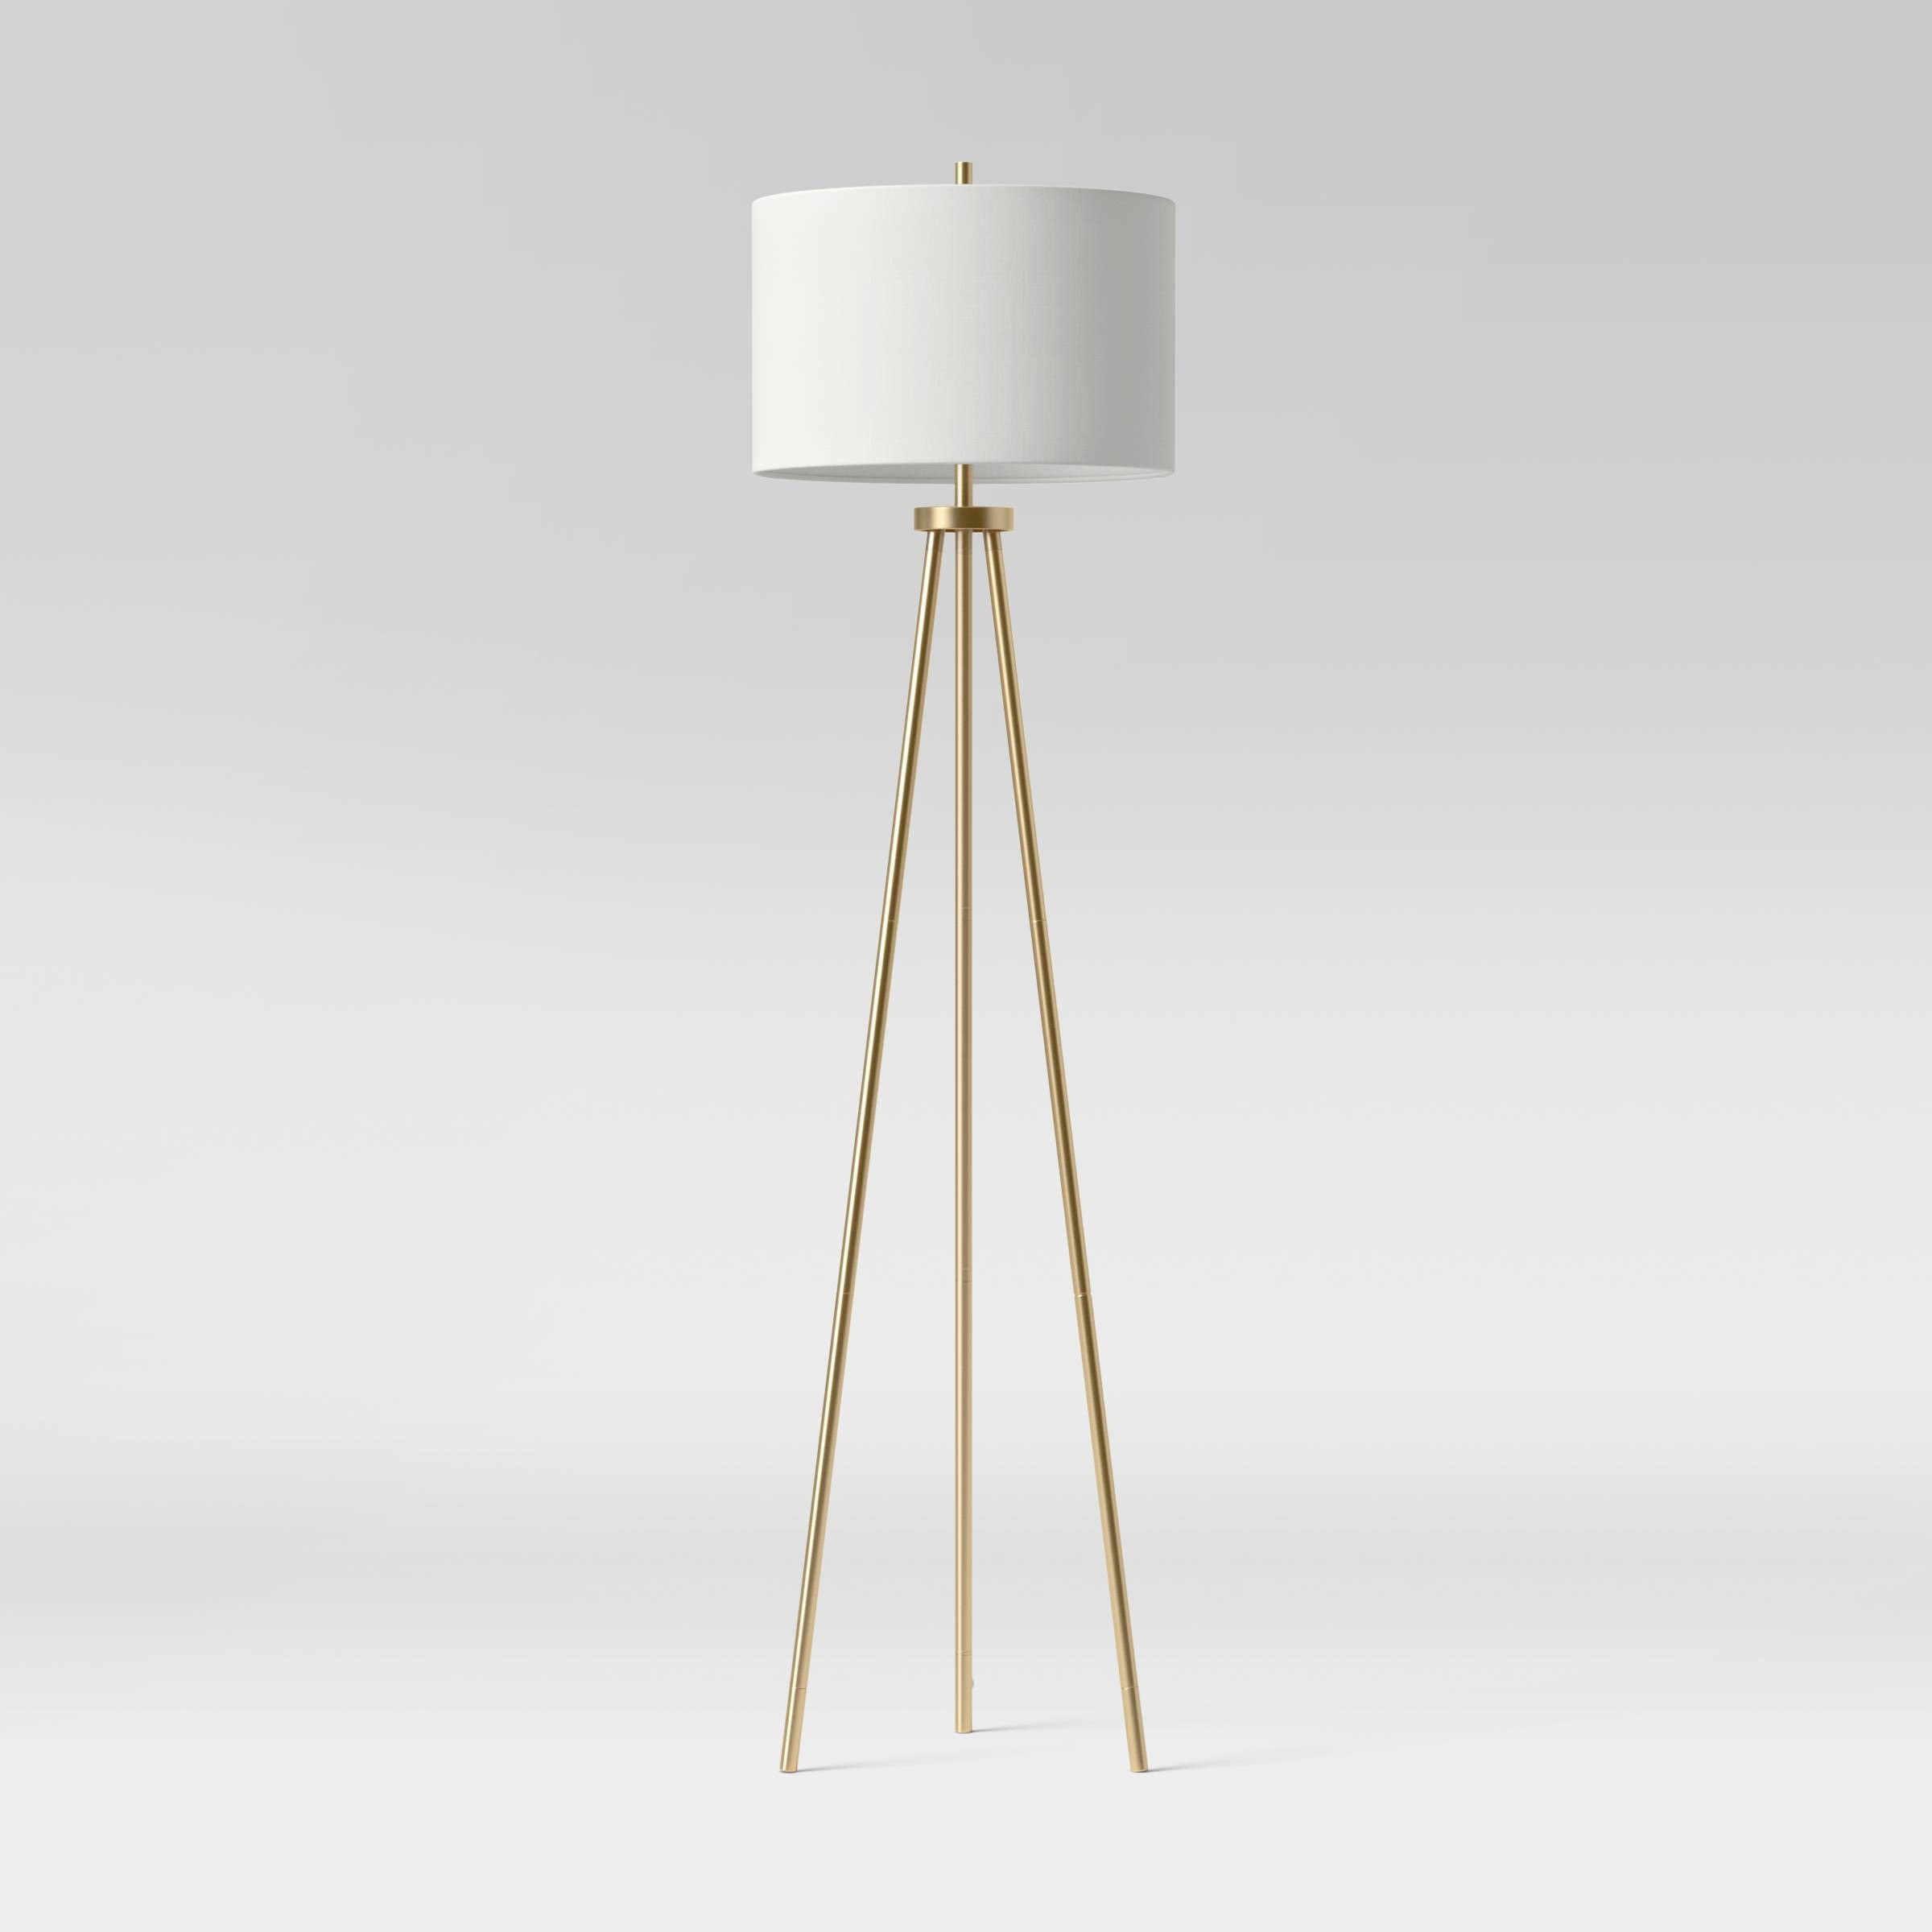 the gold floor lamp with a white shade